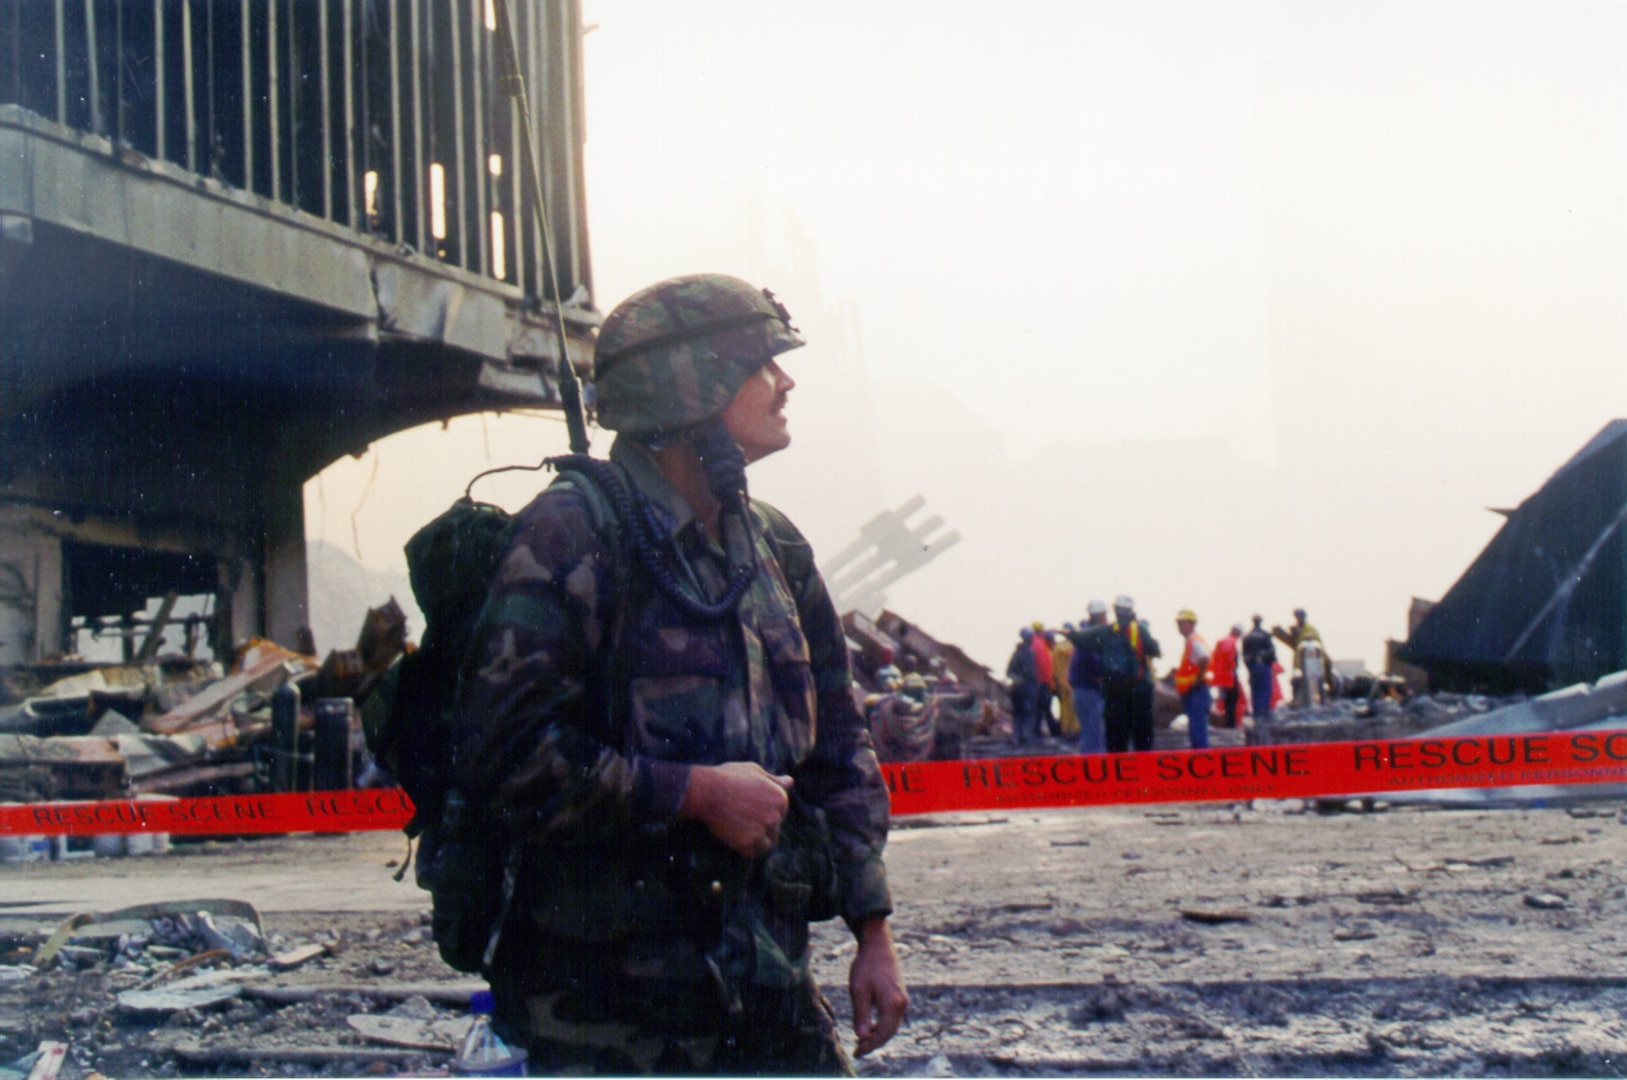 New York Army National Guard Spc. Christian Miller from Company C, 1st Battalion, 105th Infantry surveys ground zero devastation Sept. 13, 2001, two days after the 9/11 terror attacks.